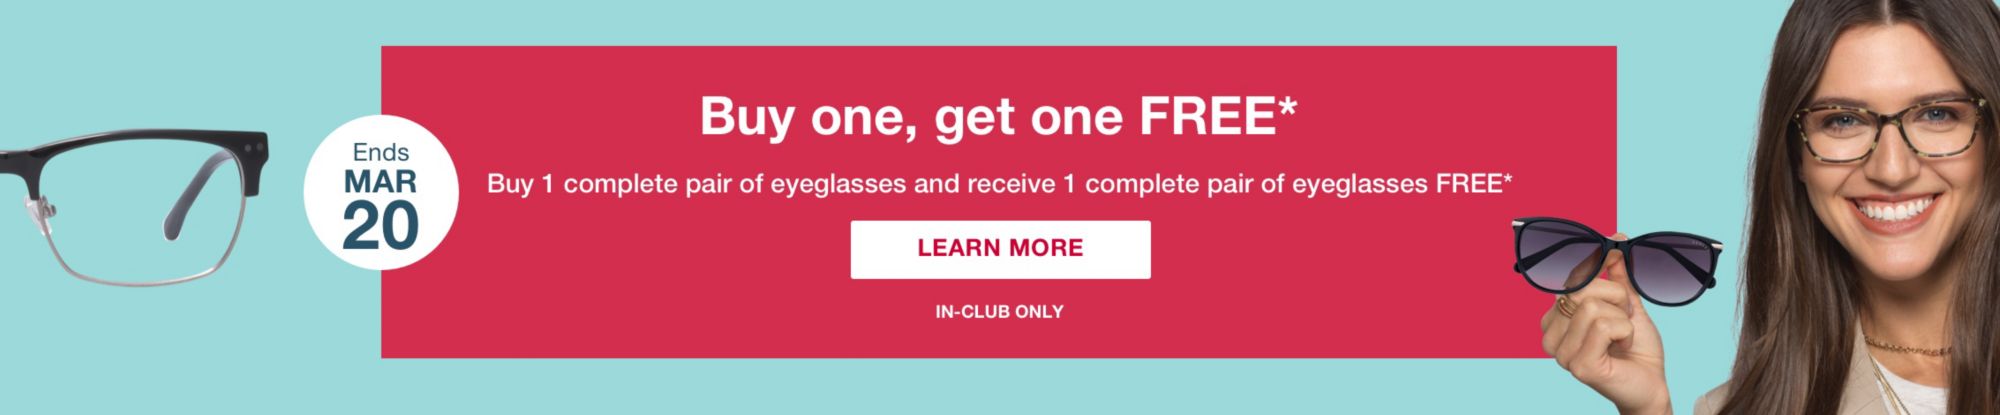 Buy one, get one FREE.* In-club only. Click to learn more